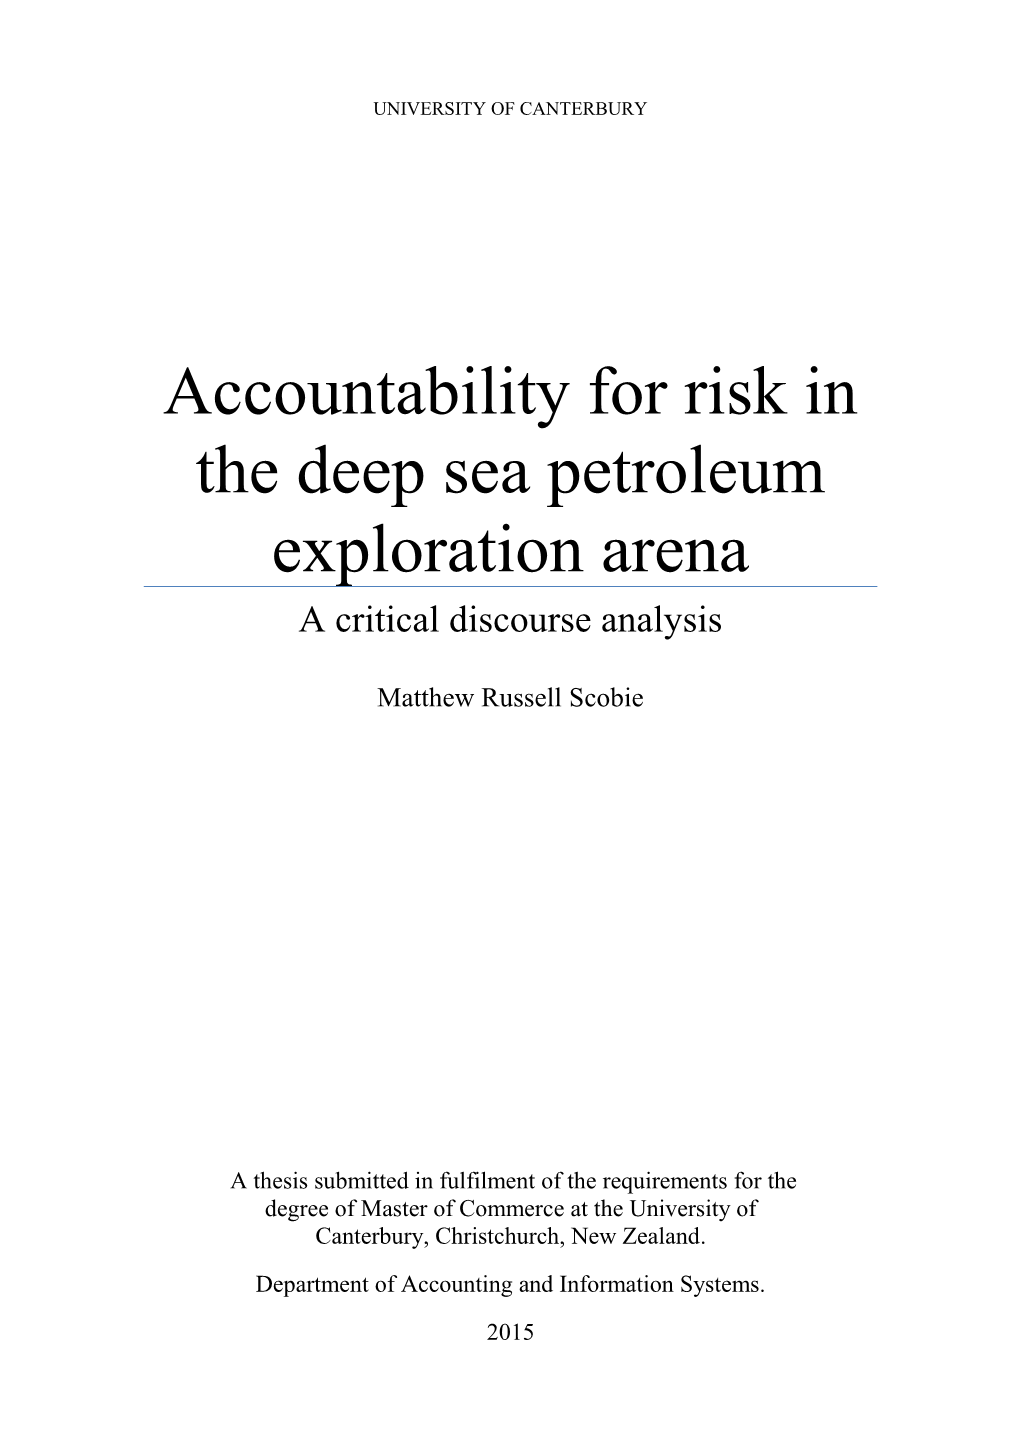 Accountability for Risk in the Deep Sea Petroleum Exploration Arena a Critical Discourse Analysis